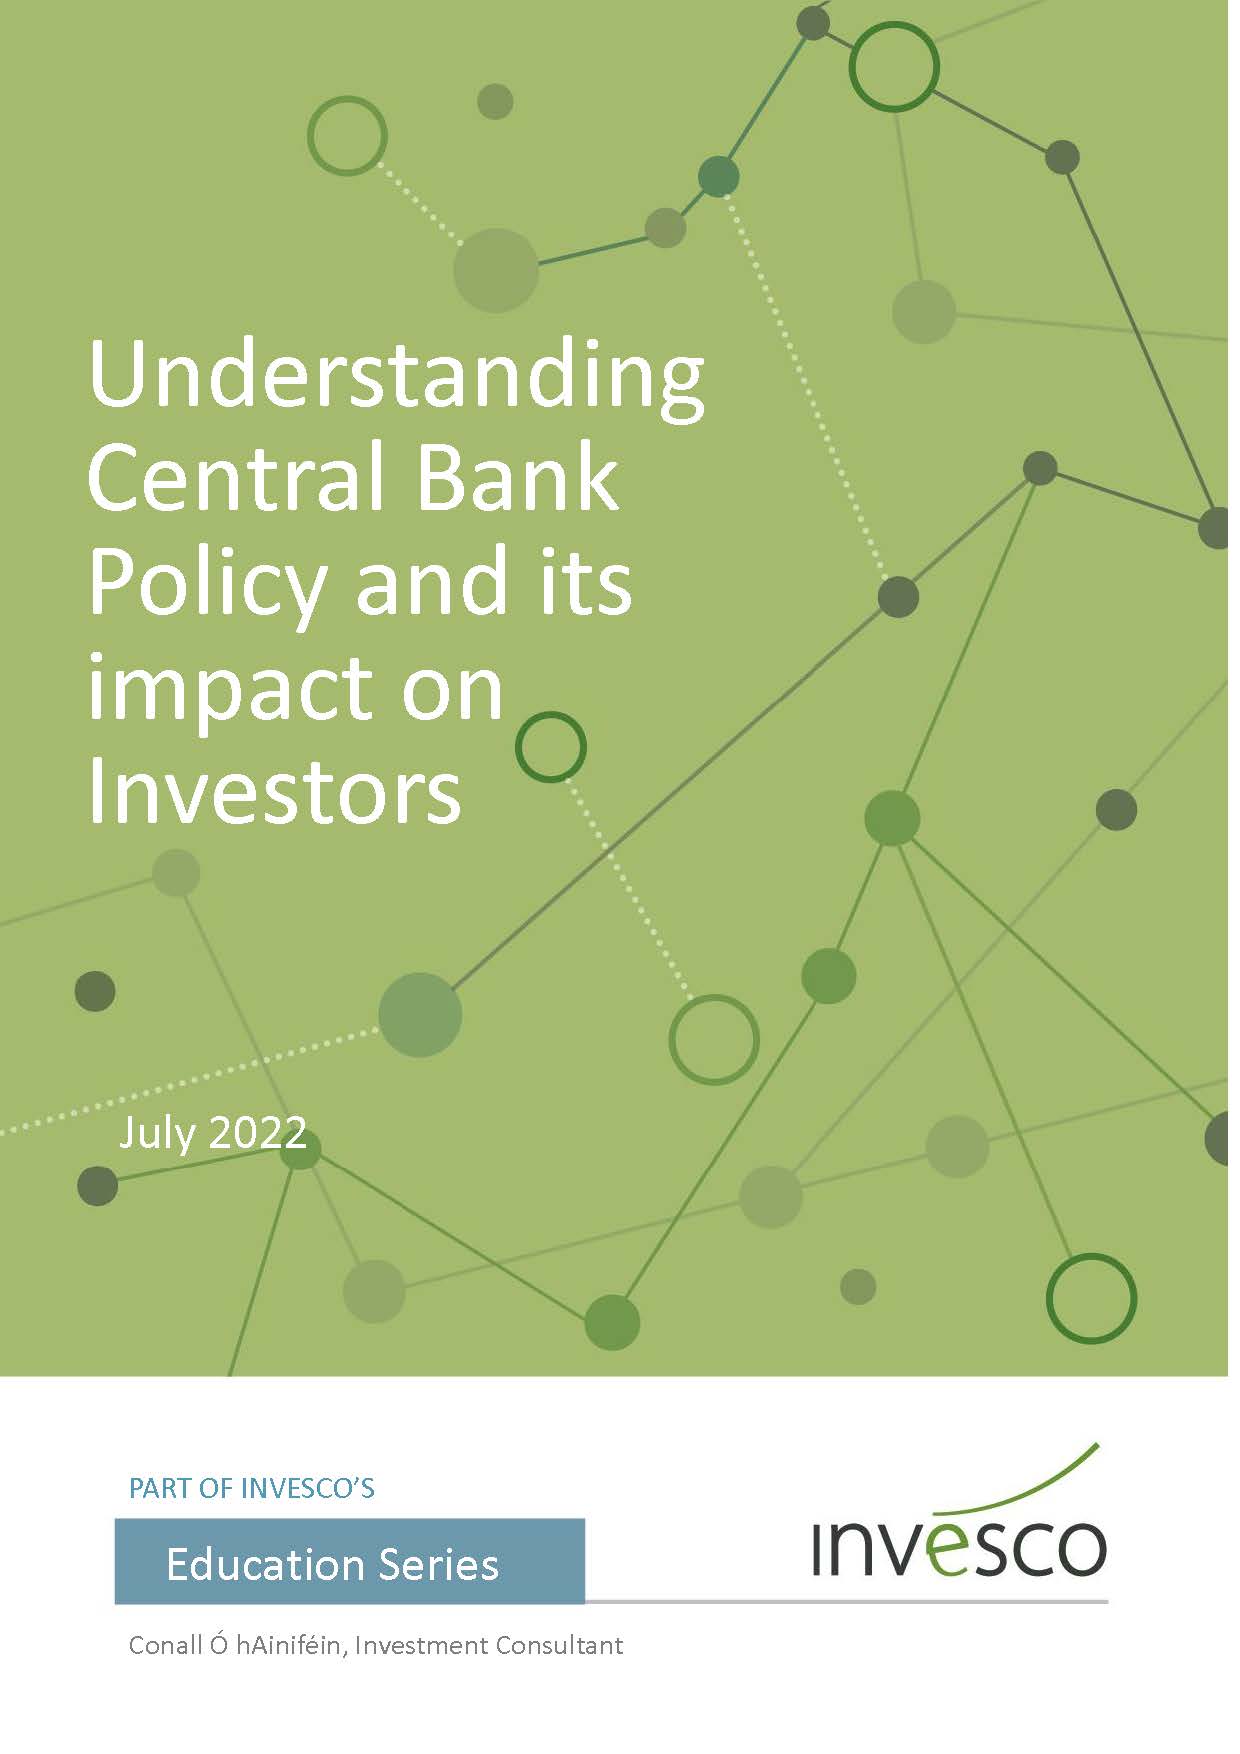 Invesco Education Series Central Bank Policy